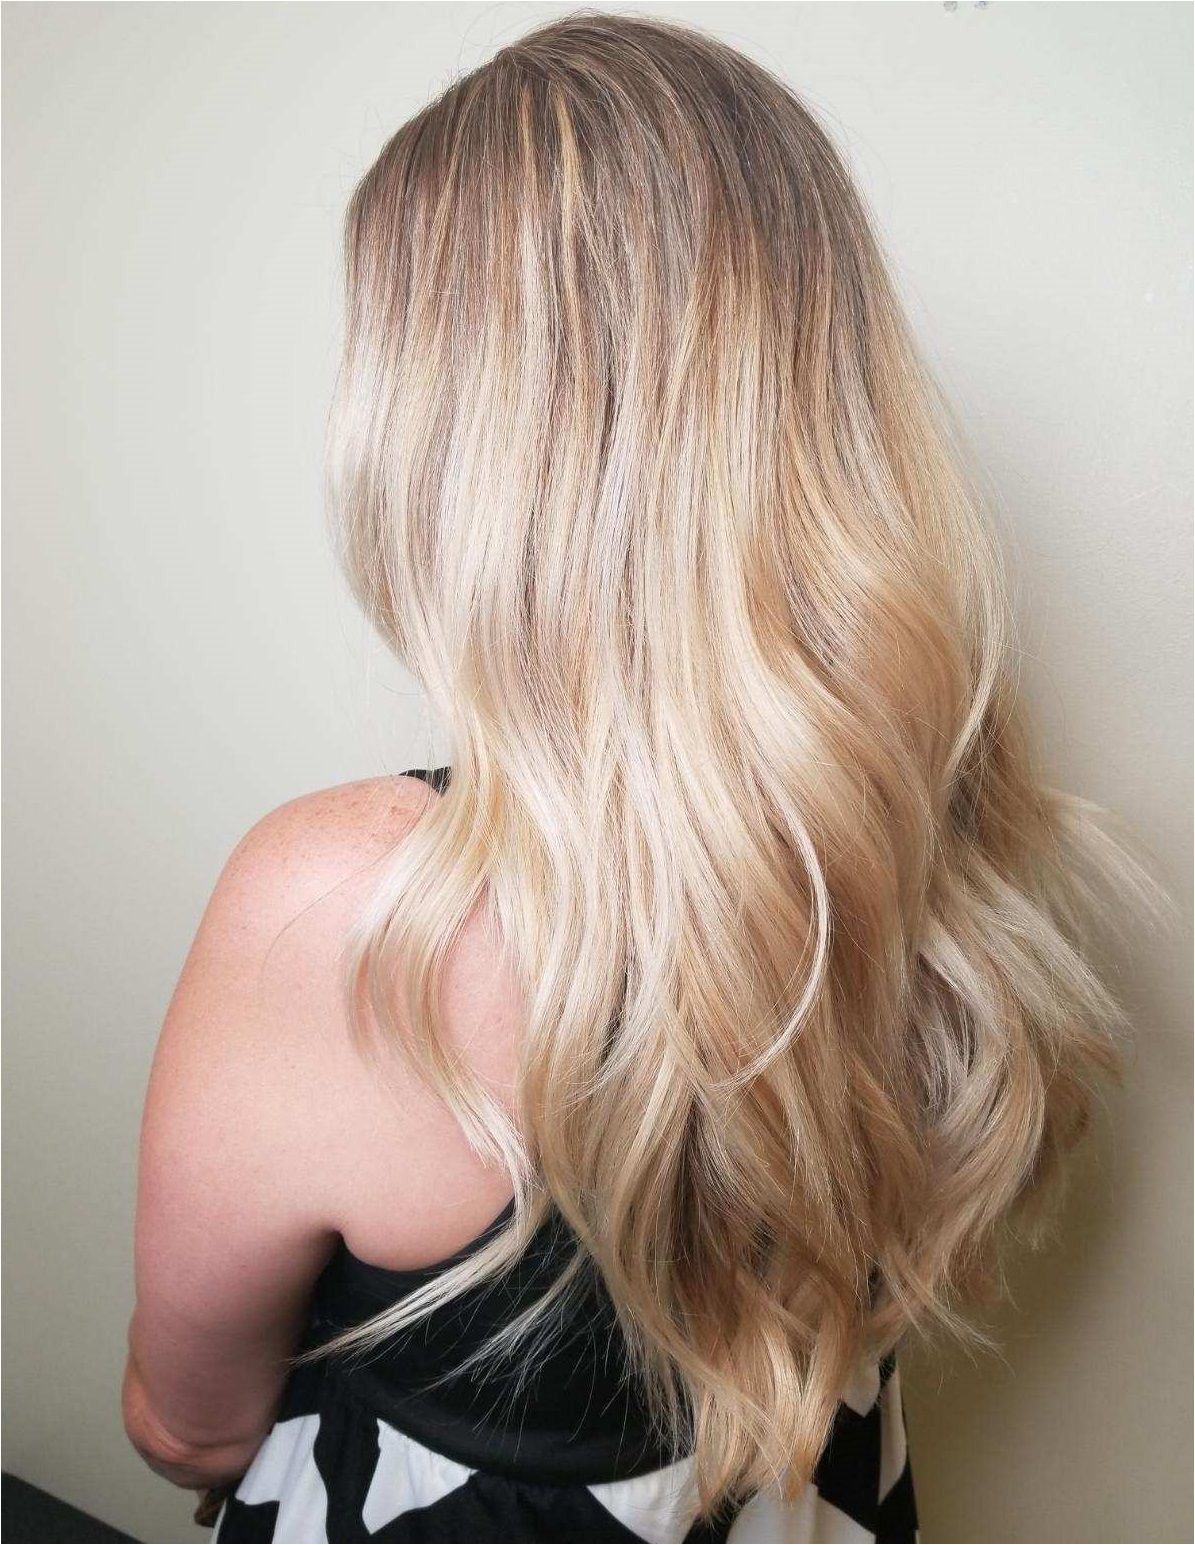 Long blonde highlights by Alex at Monroeville